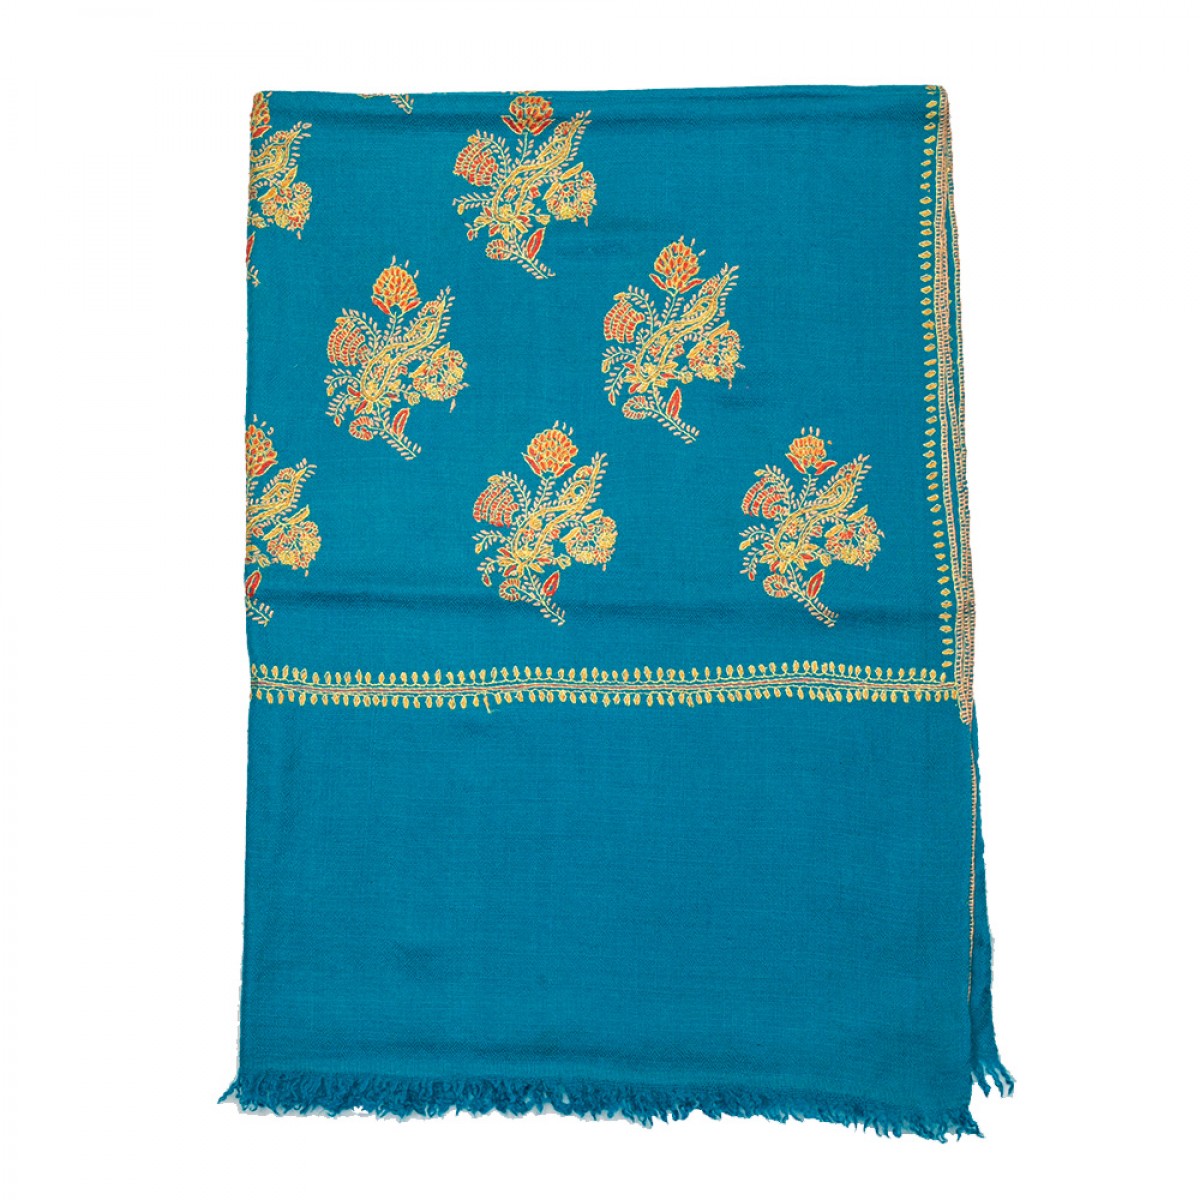 Embroidered Pashmina stole - Turquoise